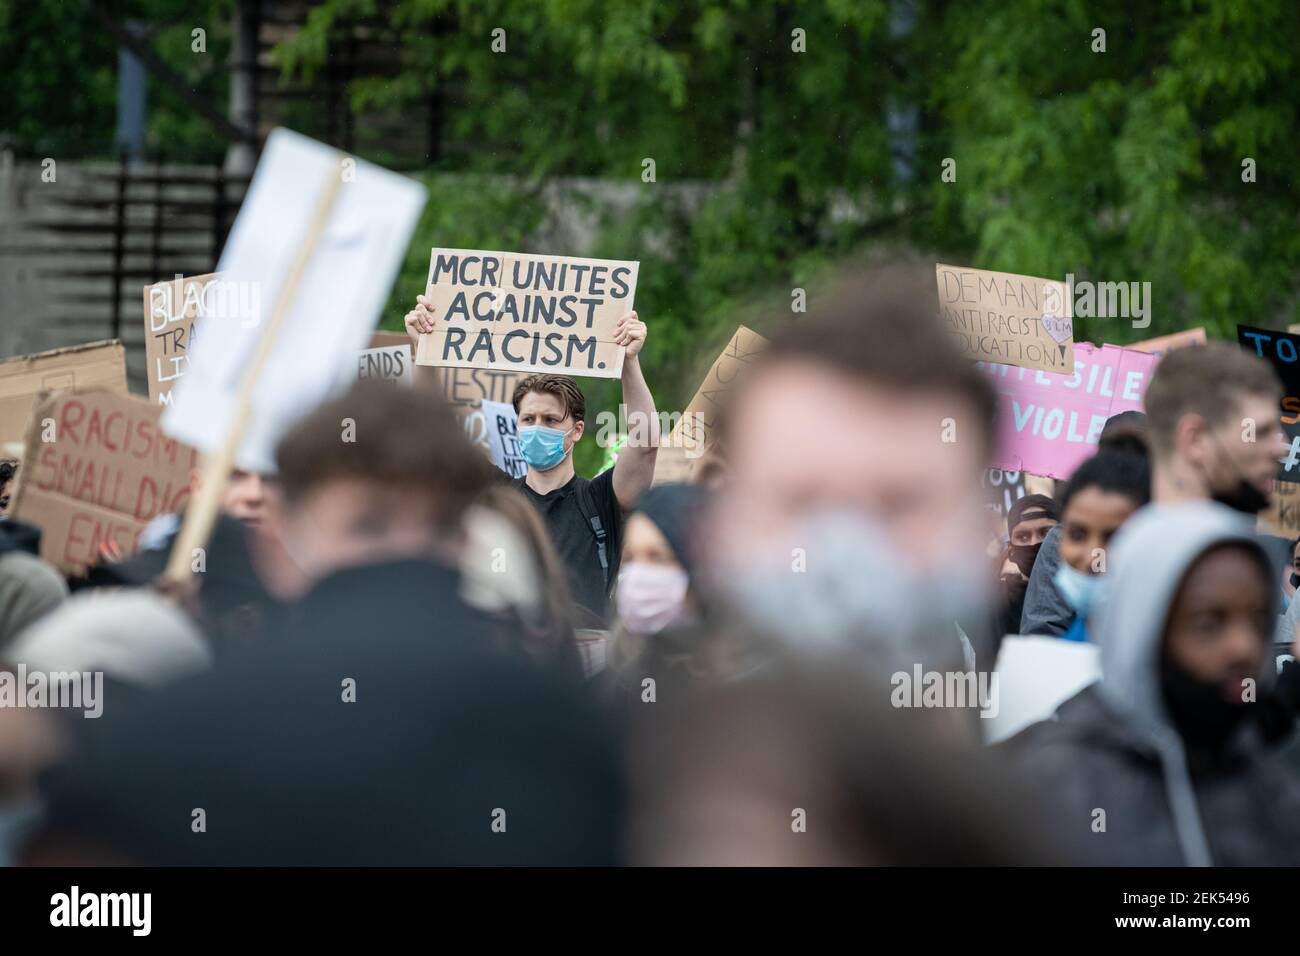 A Protester holds a placard that says mcr unites against racism during the demonstration. Thousands of people attend the most recent 'Black Lives Matter' protest in Manchester's city centre following the death of George Floyd in the USA. (Photo by Kenny Brown / SOPA Images/Sipa USA)  Stock Photo